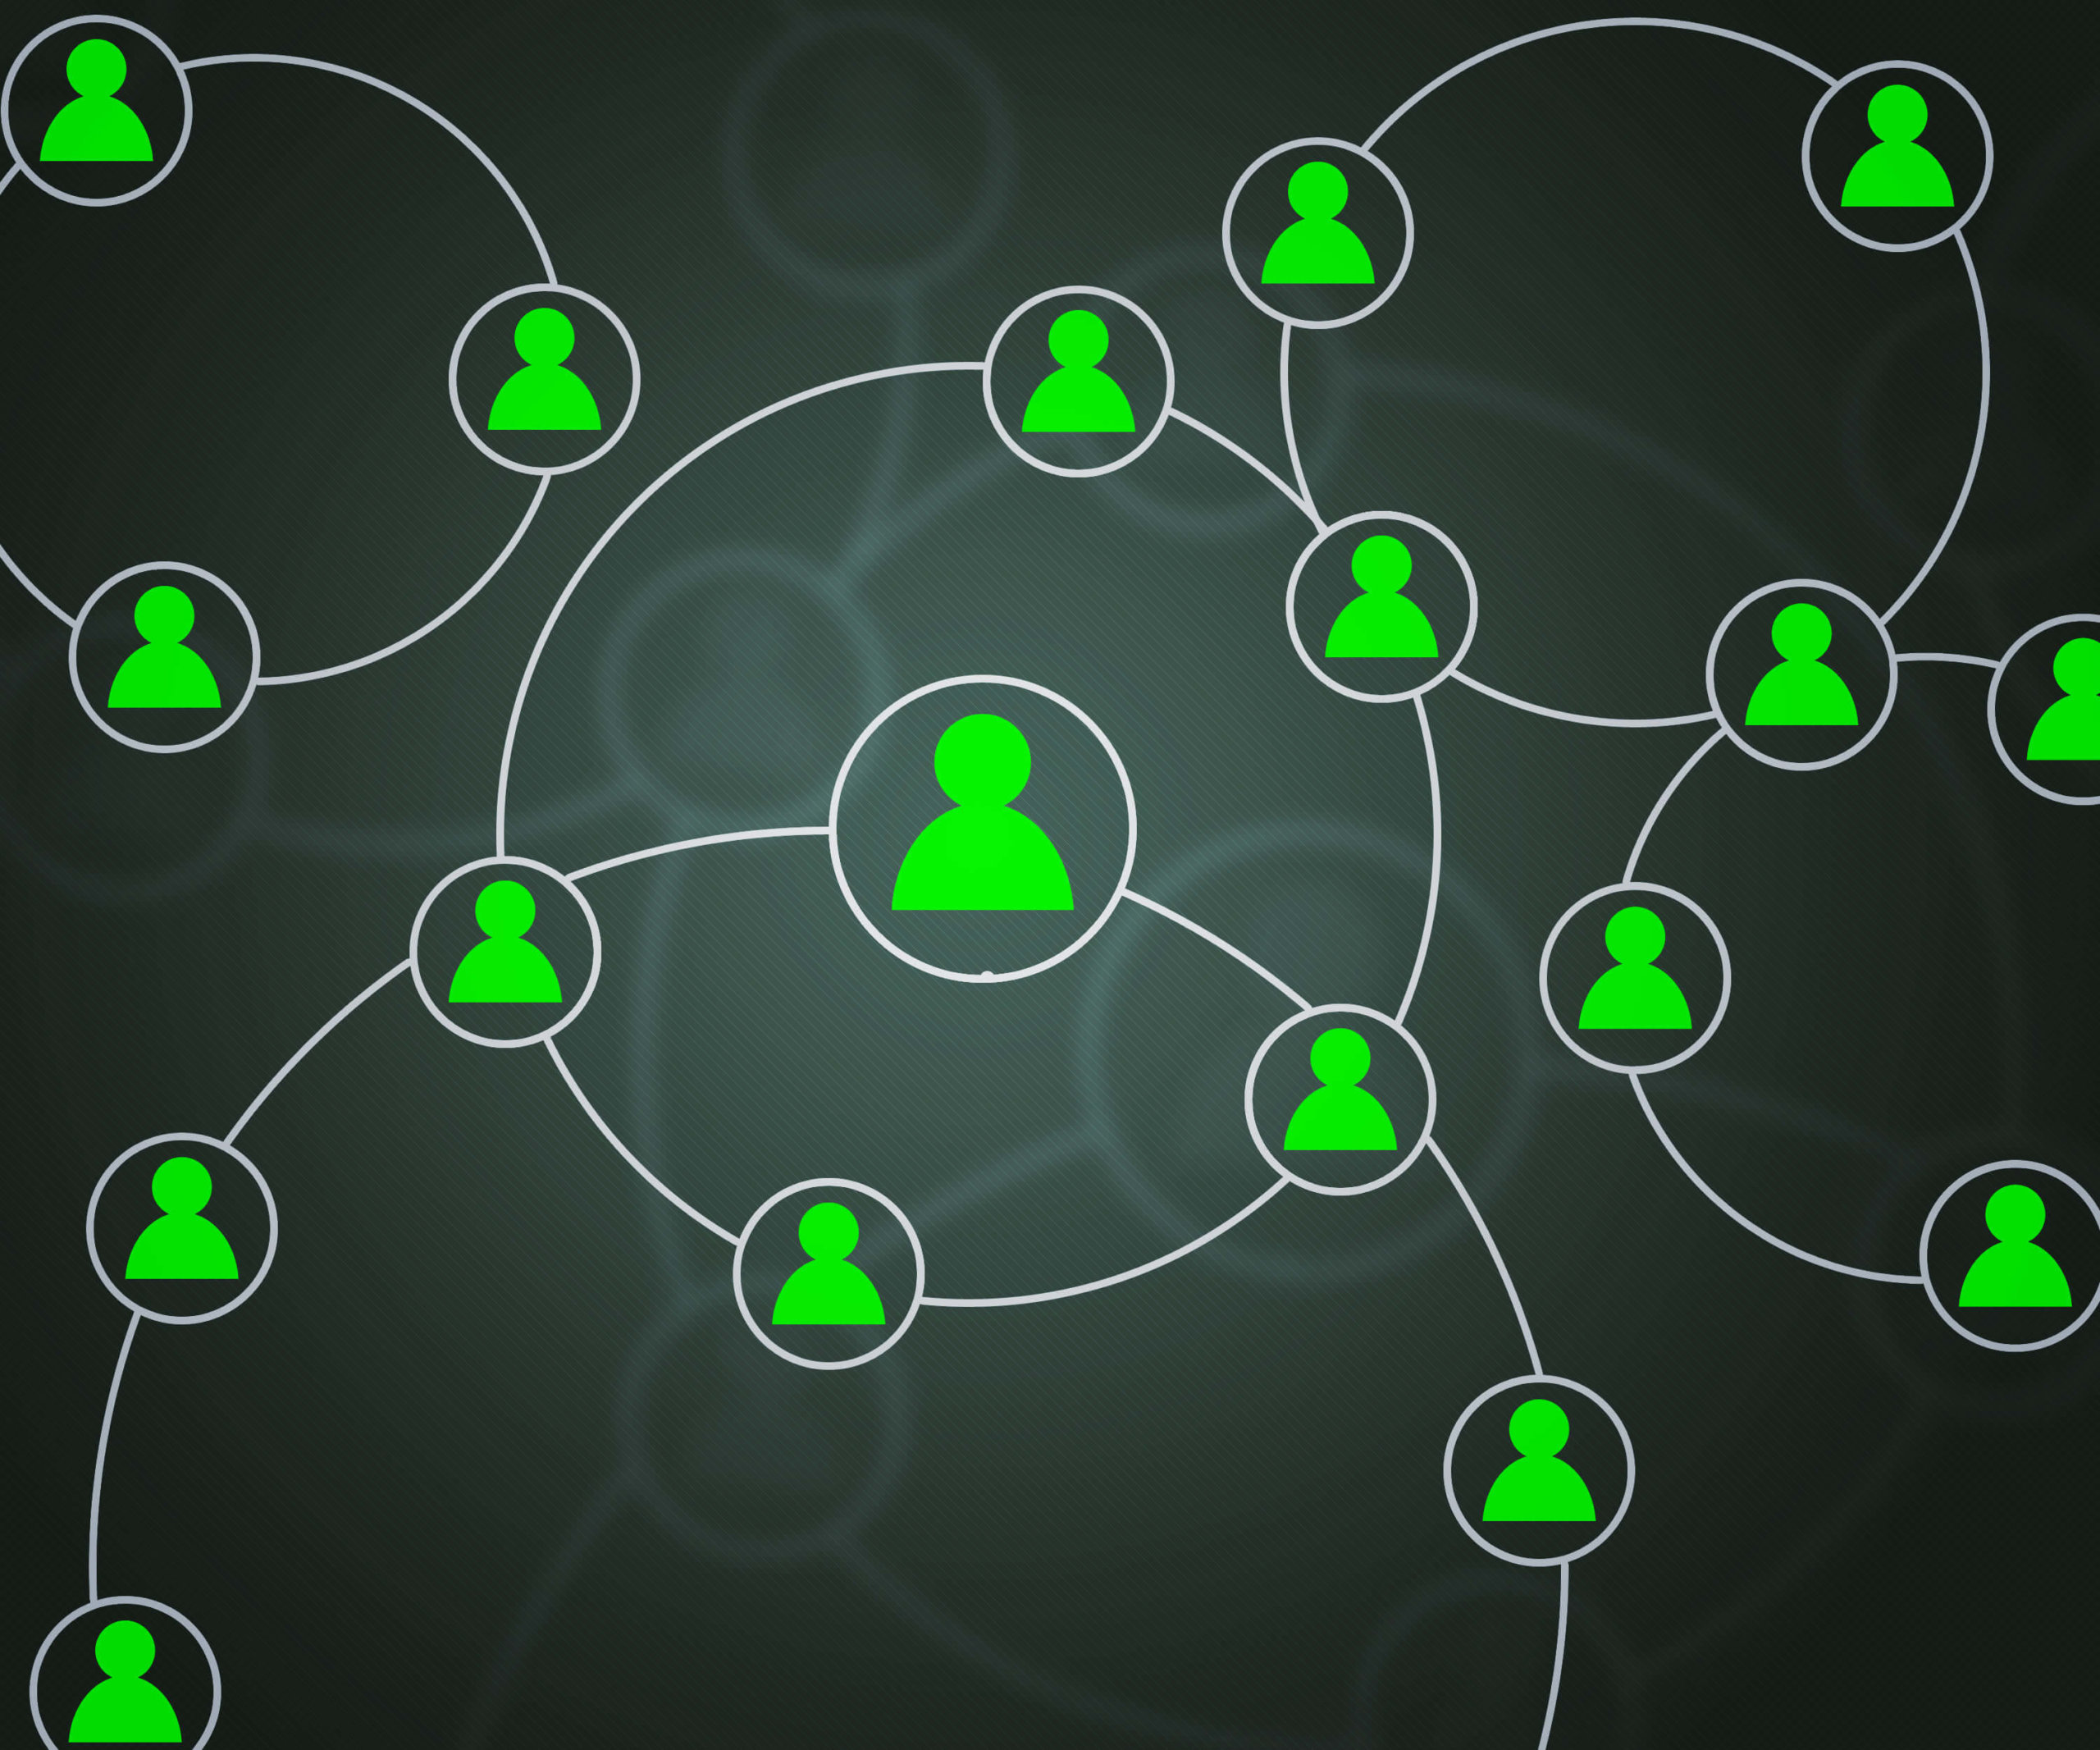 A network of green people in a circle on a dark background.